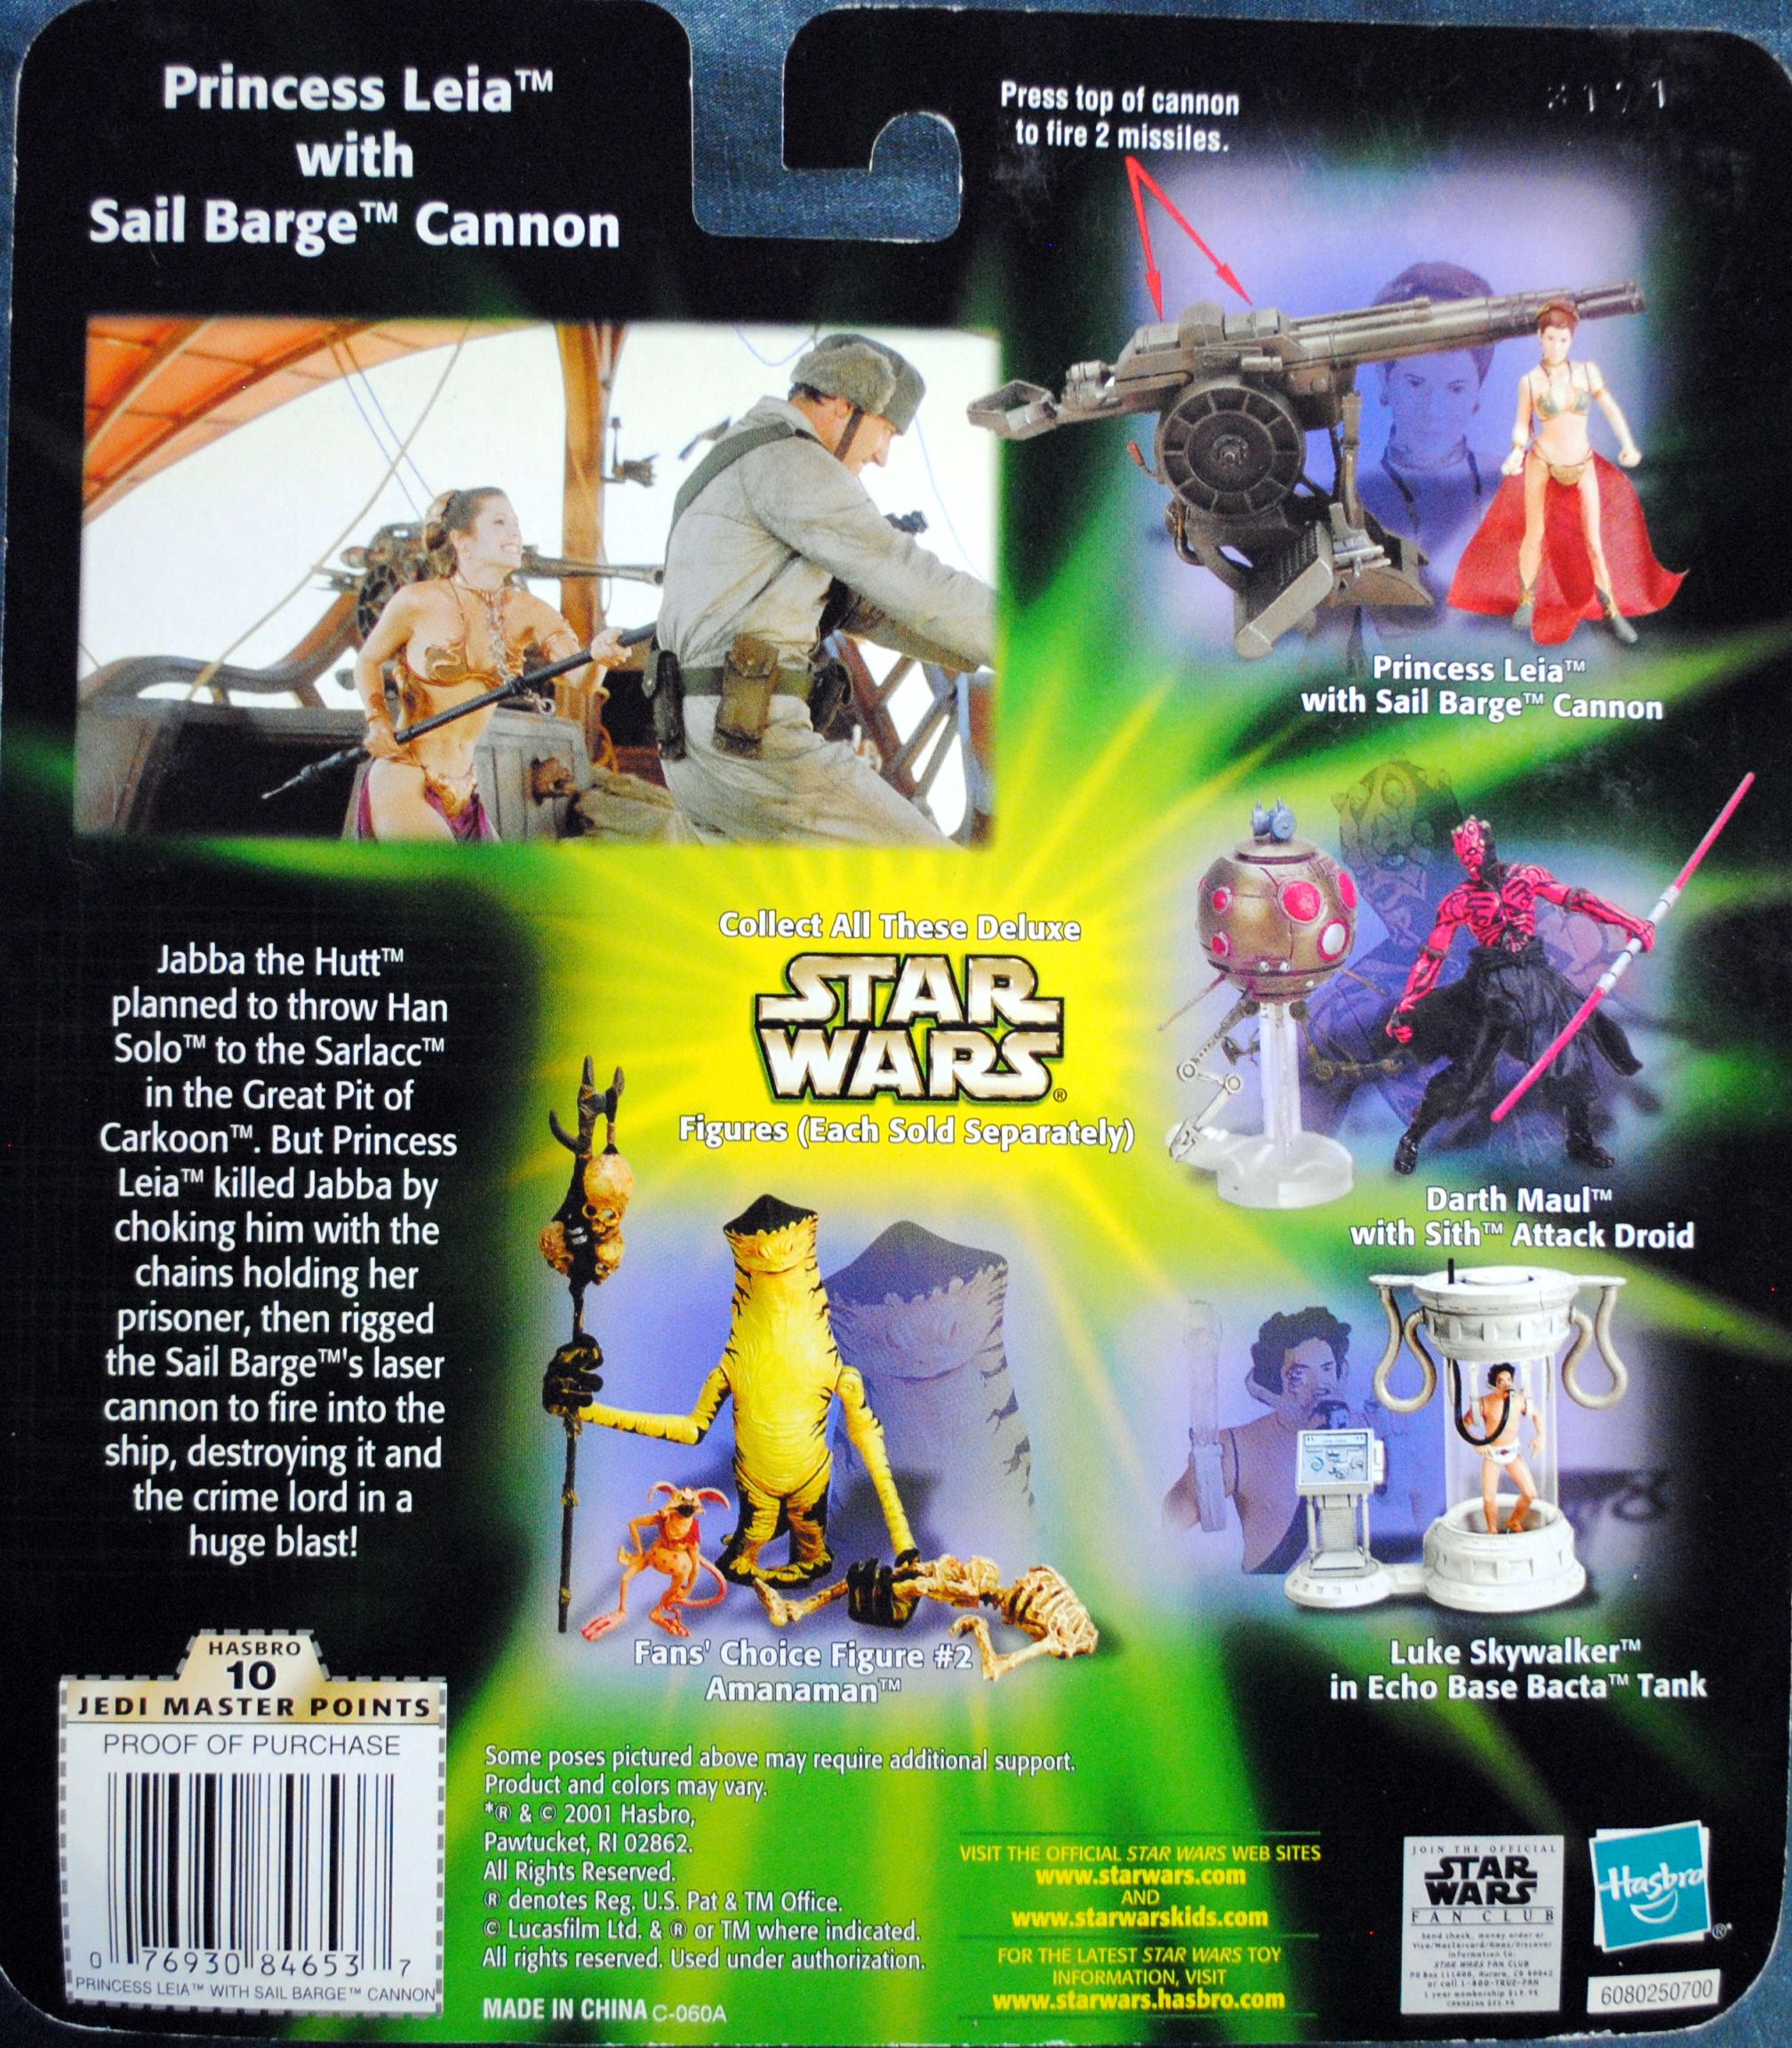 Power Of The Jedi 3.75 - Deluxe Princess Leia slave With Sail Barge Cannon ROTJ - Hasbro (Star Wars Episode VI Return Of The Jedi) action figure collectible [Barcode 0076930846537] - Main Image 2